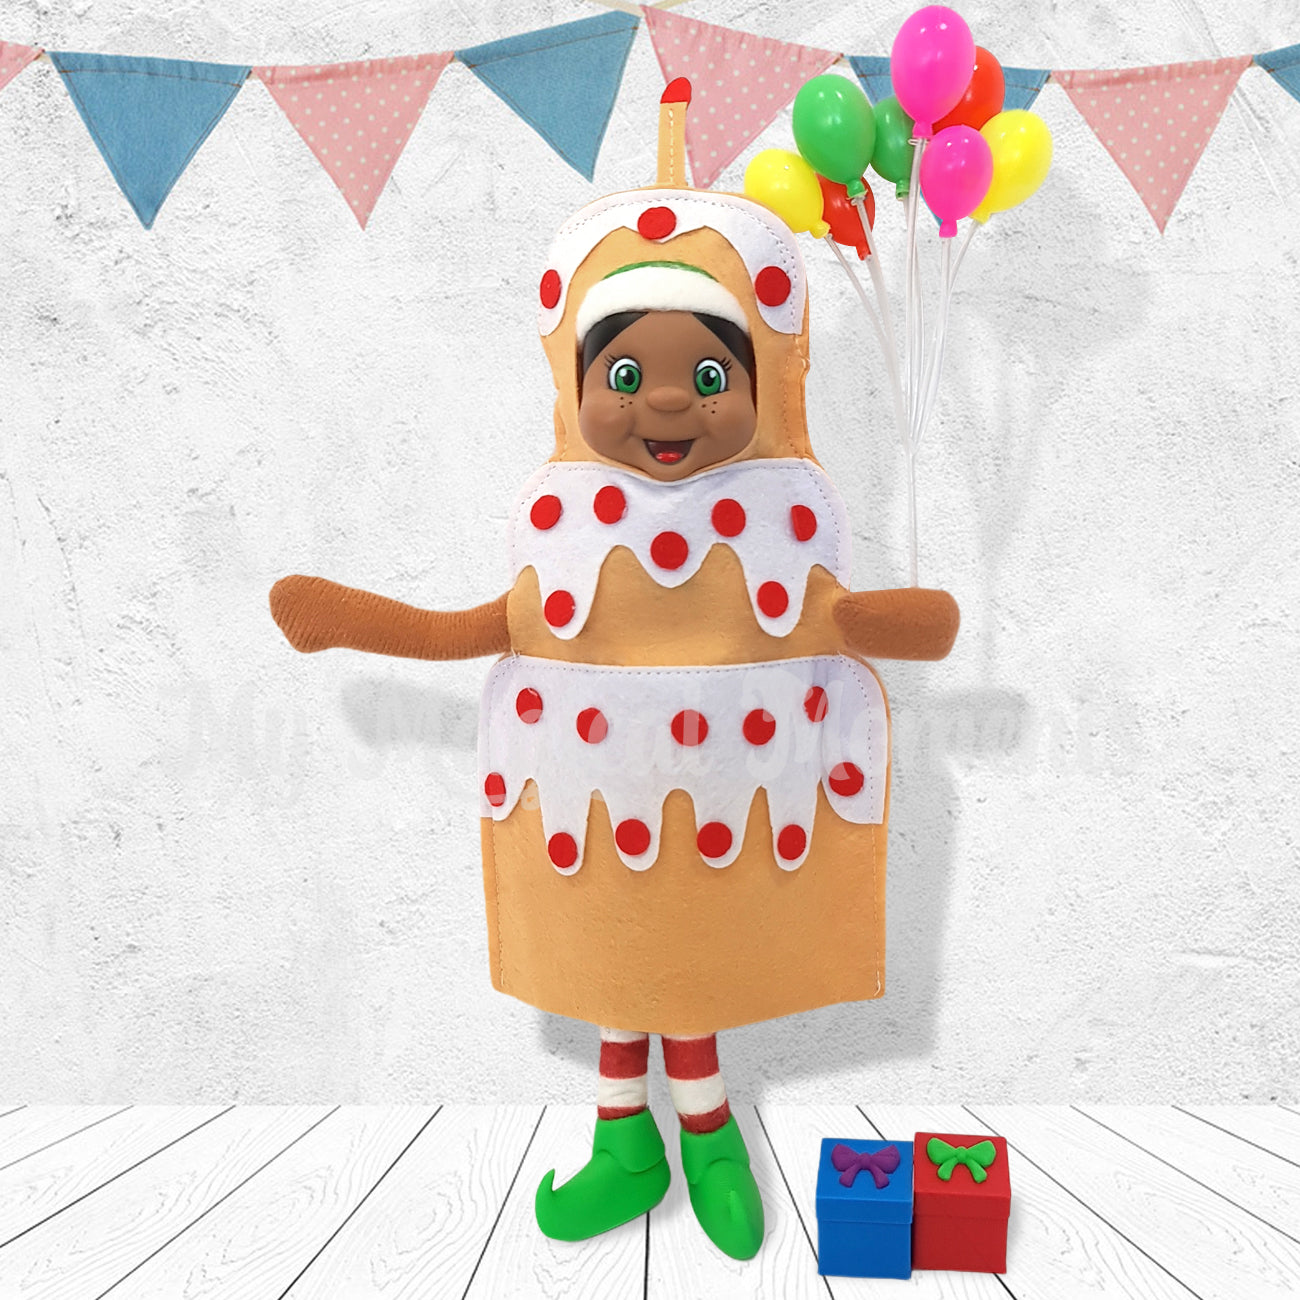 Black hair elf celebrating a birthday in a cake costume holding balloons and presents